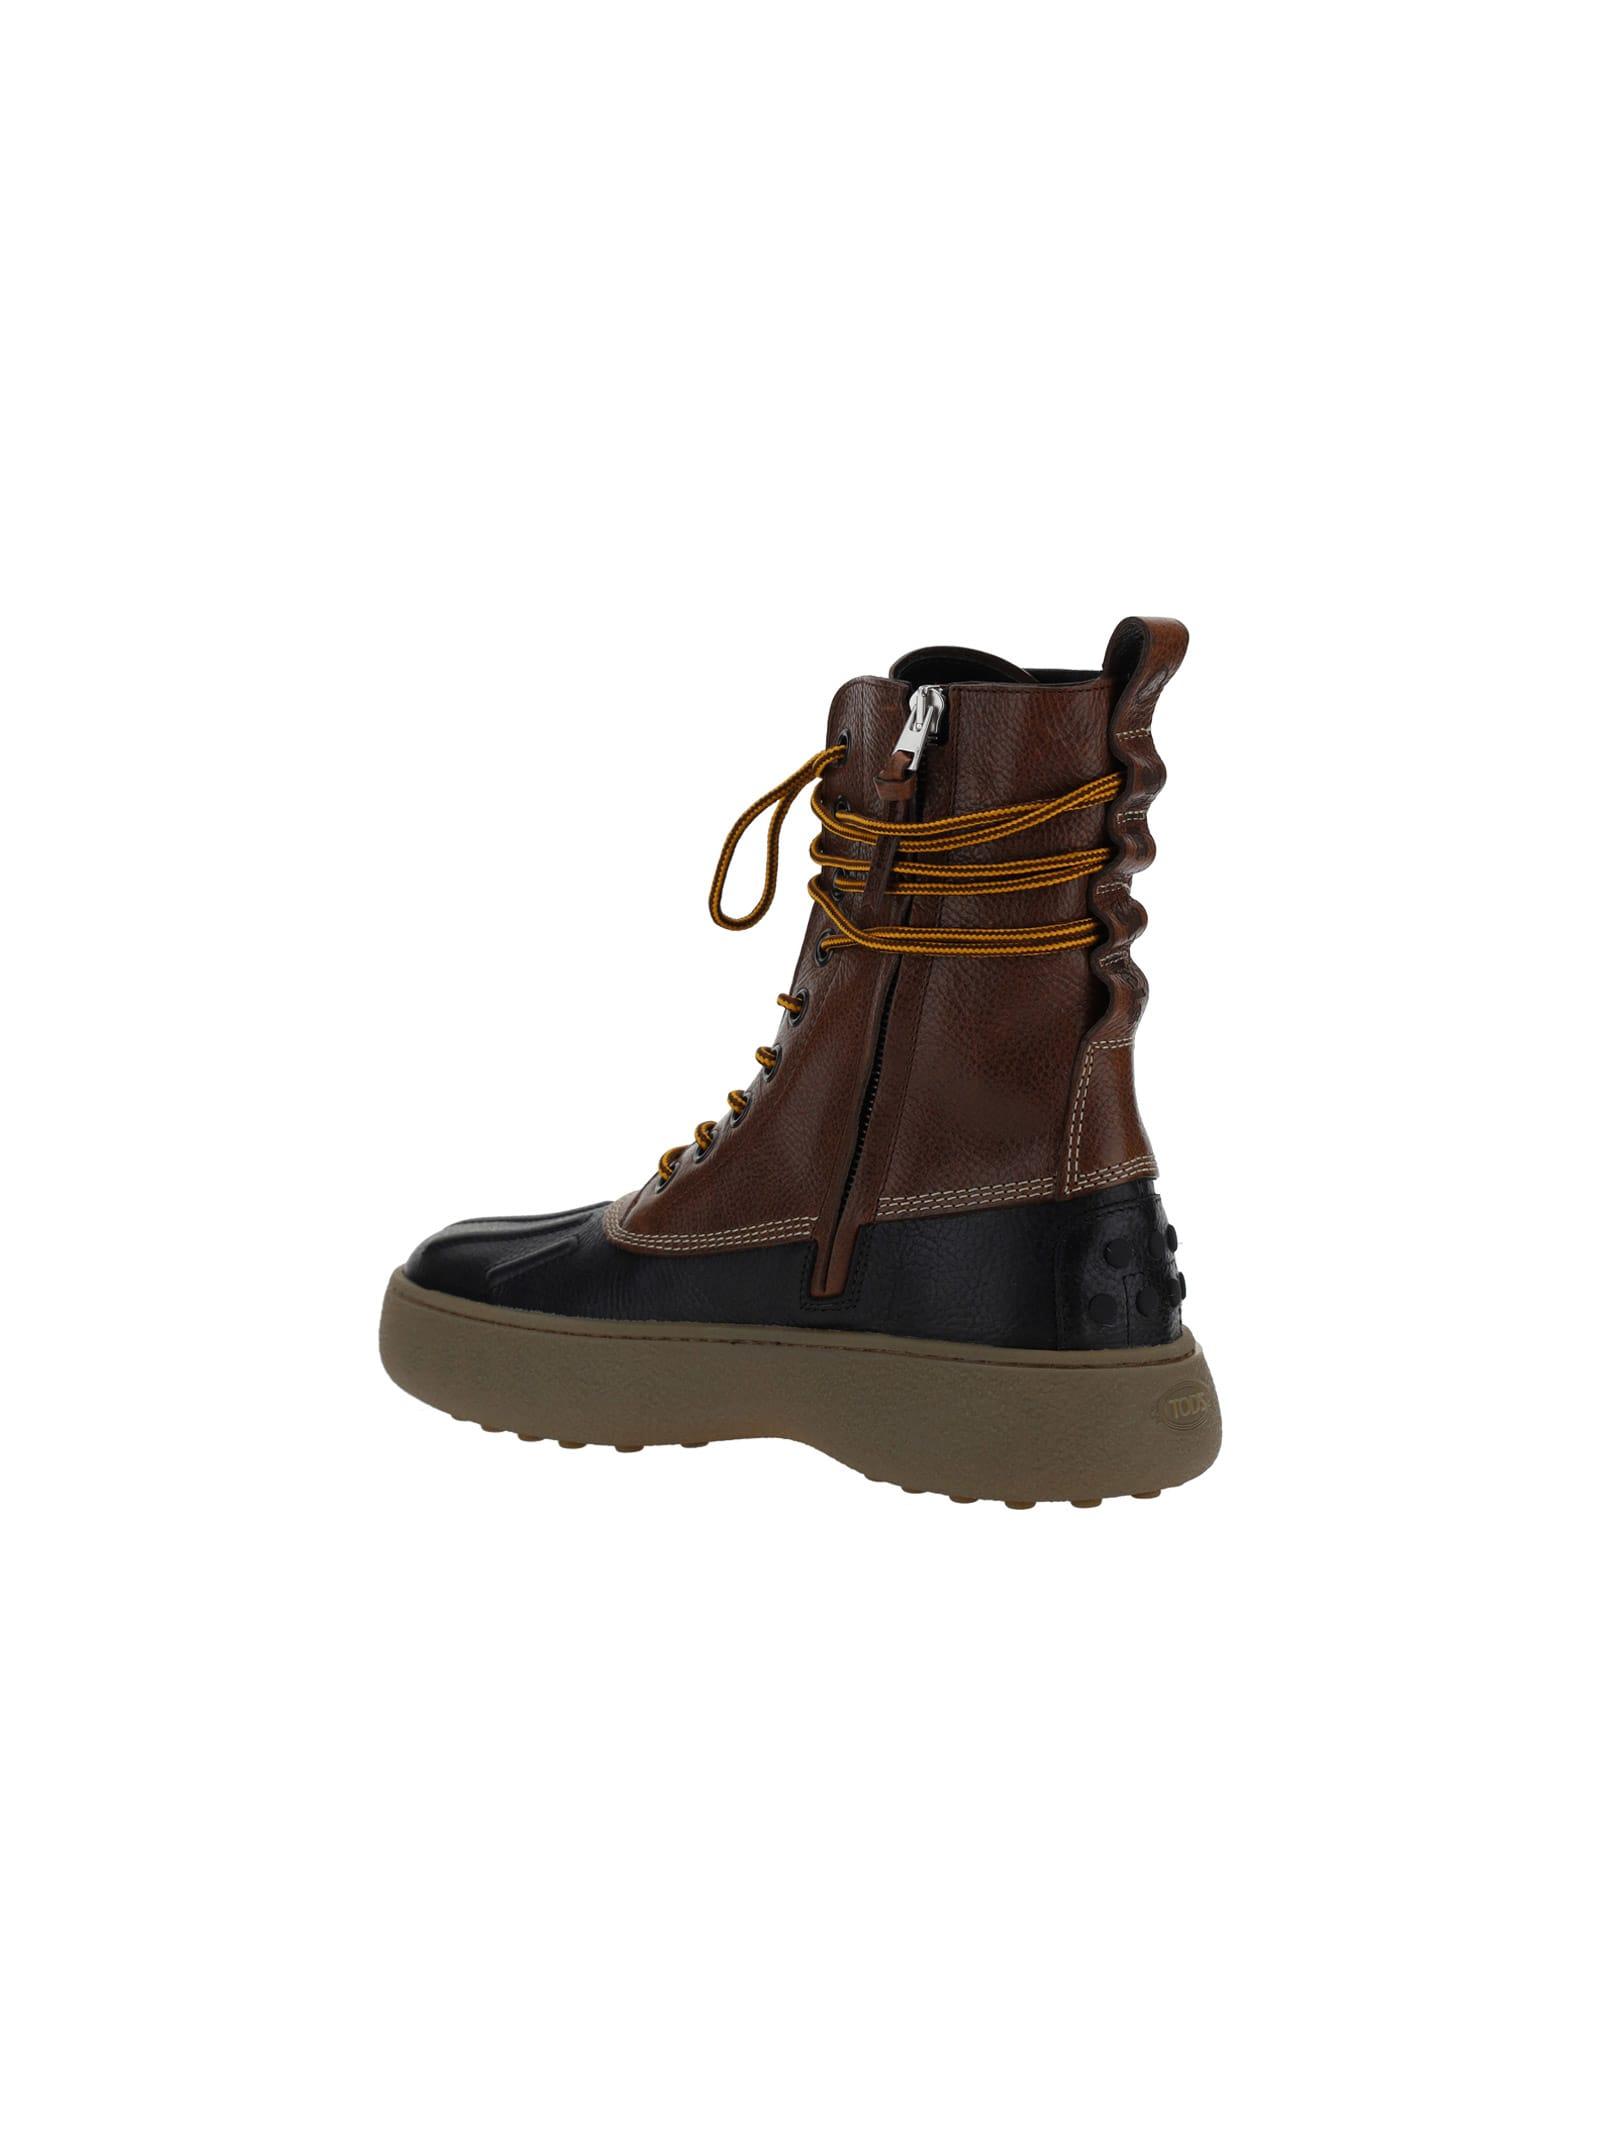 8 MONCLER PALM ANGELS Palm Angels X Moncler Winter Boots in Brown for Men |  Lyst